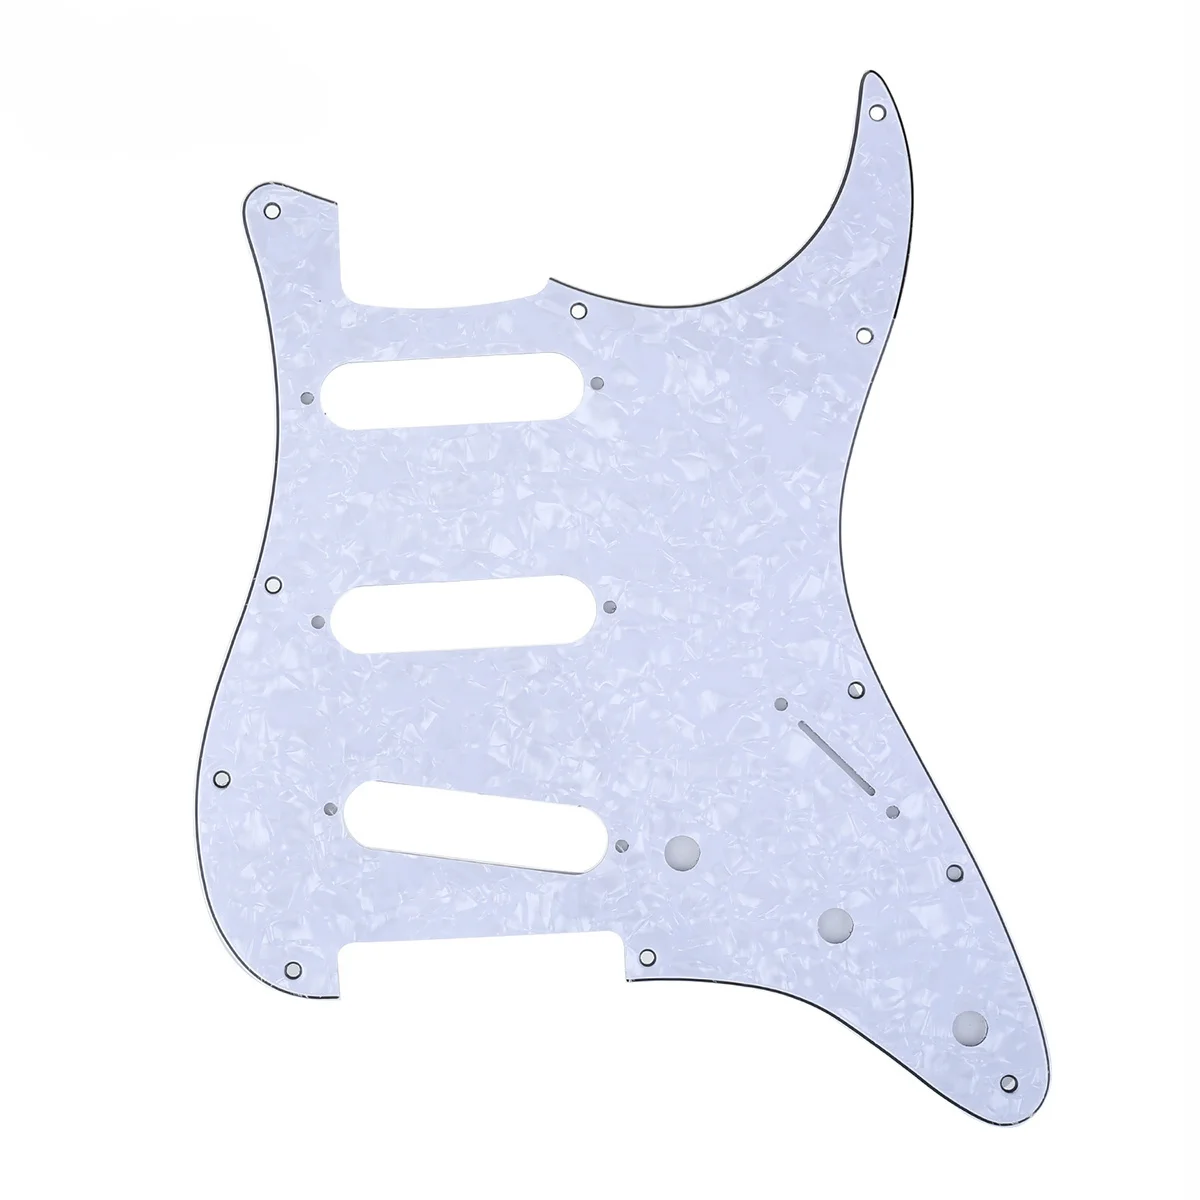 

Musiclily SSS 11 Hole Strat Guitar Pickguard for Fender USA/Mexican Made Standard Stratocaster Style, 4Ply White Pearl